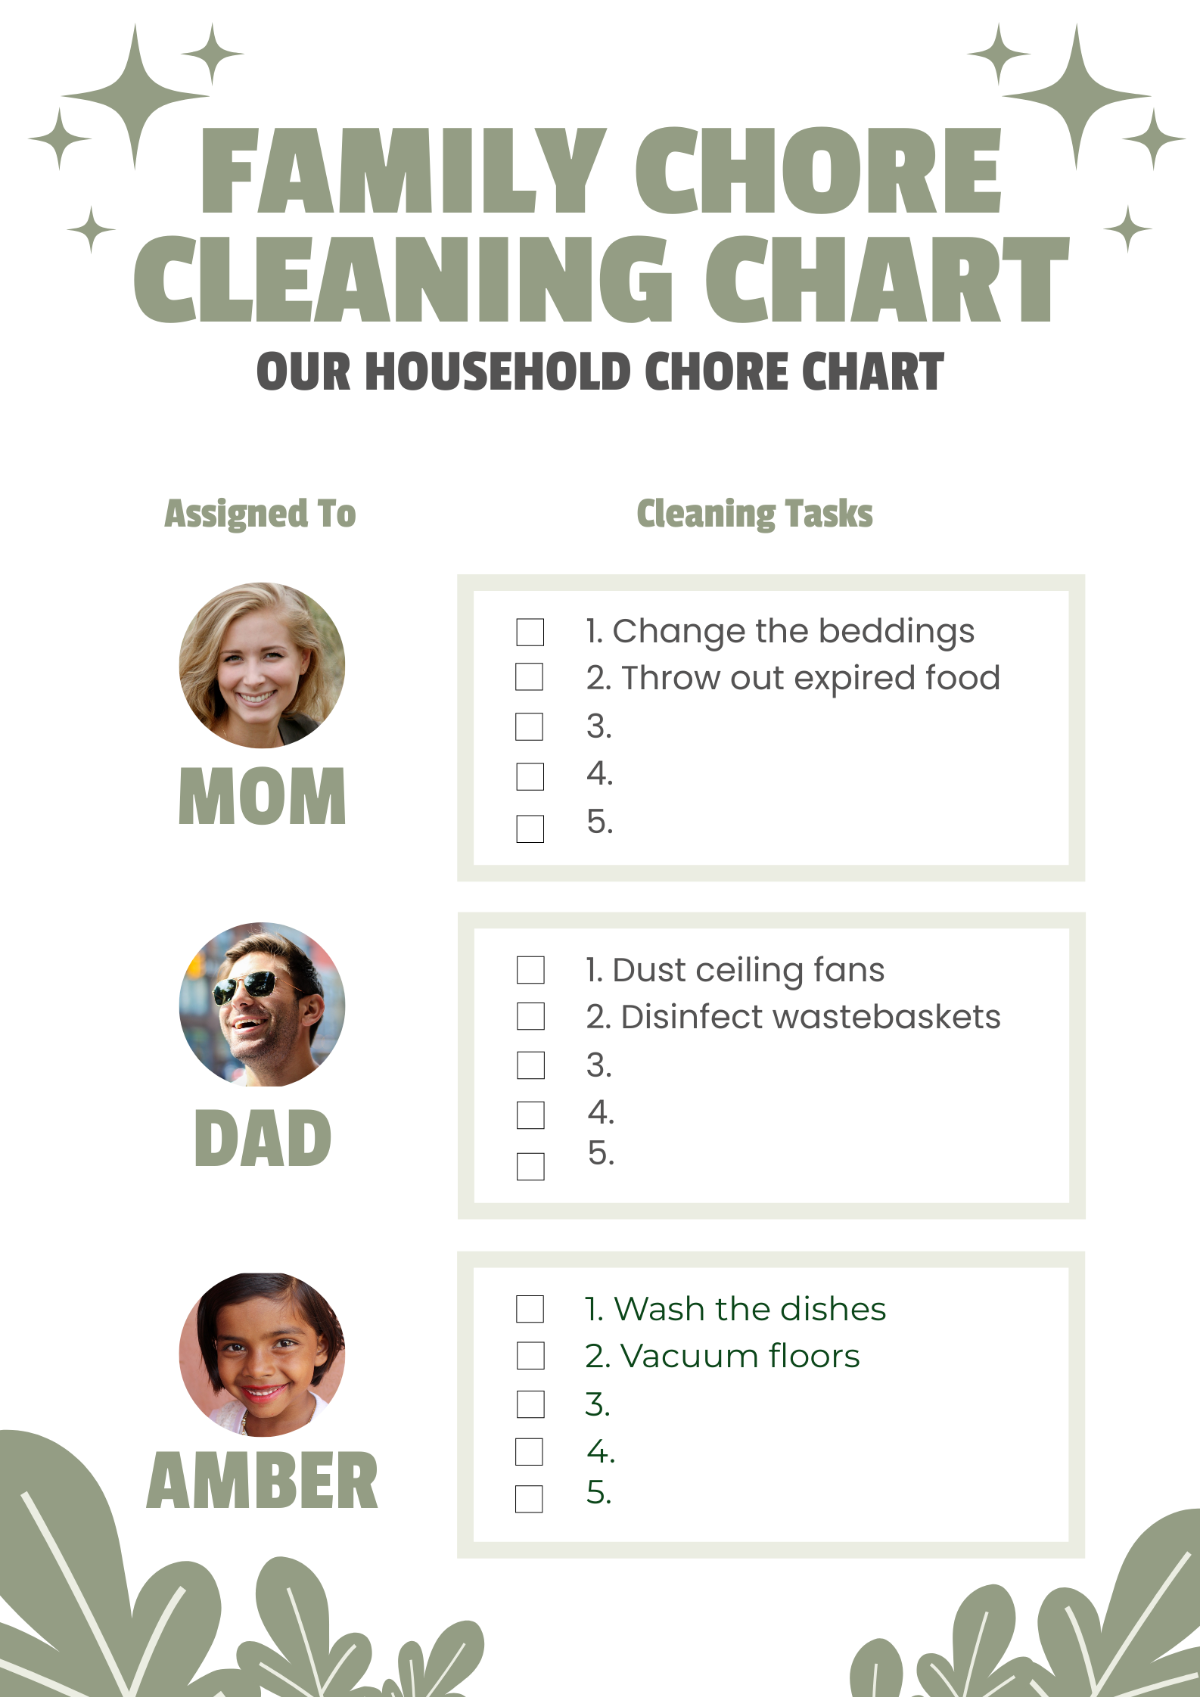 Family Chore Cleaning Chart